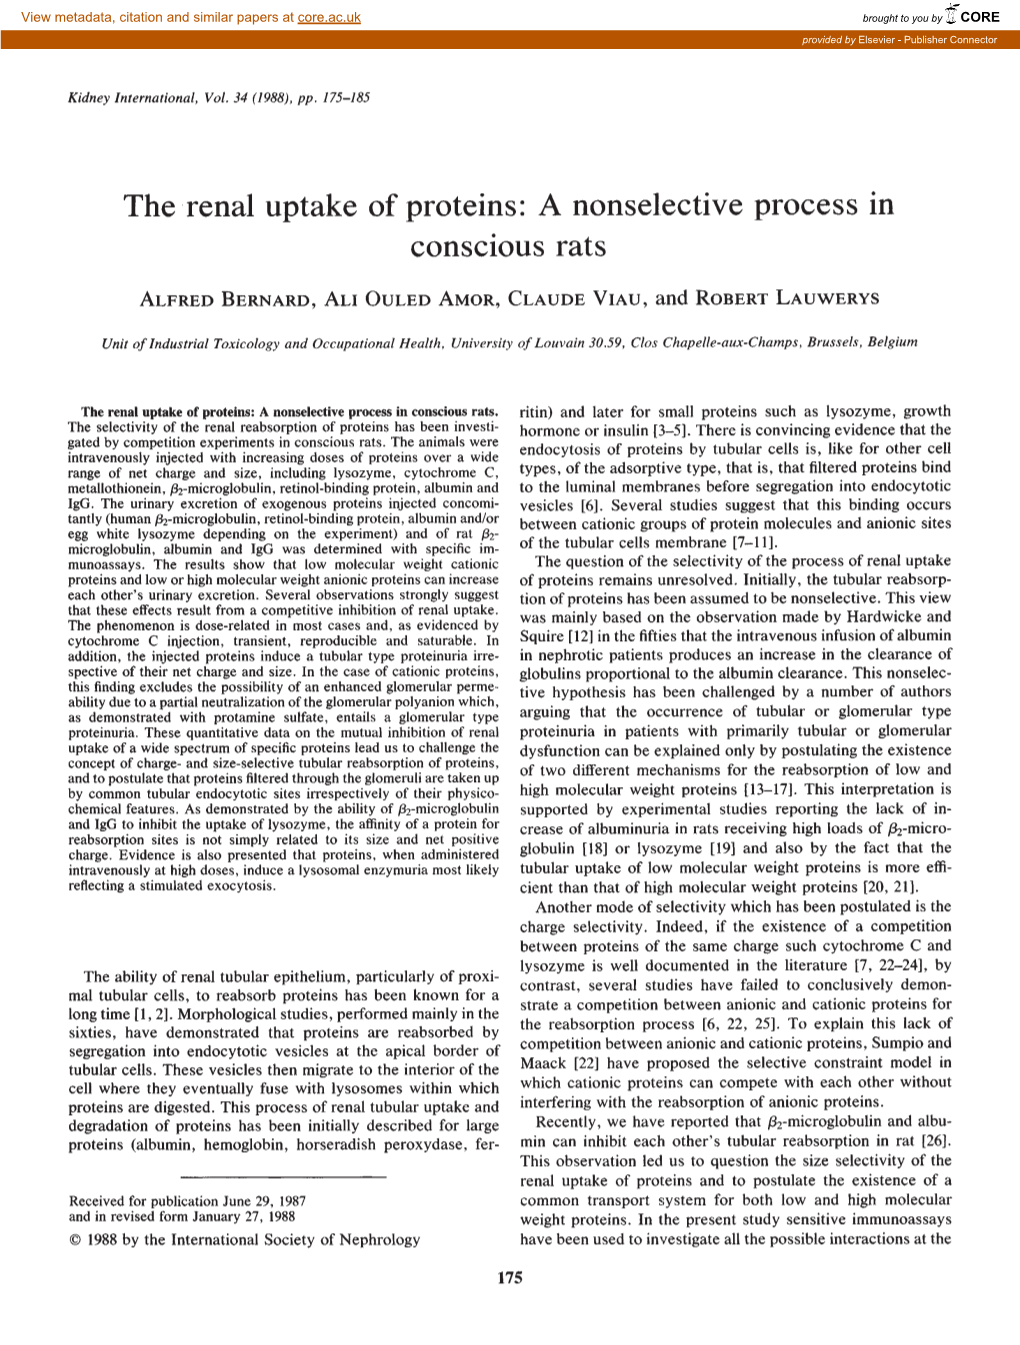 The Renal Uptake of Proteins: a Nonselective Process in Conscious Rats